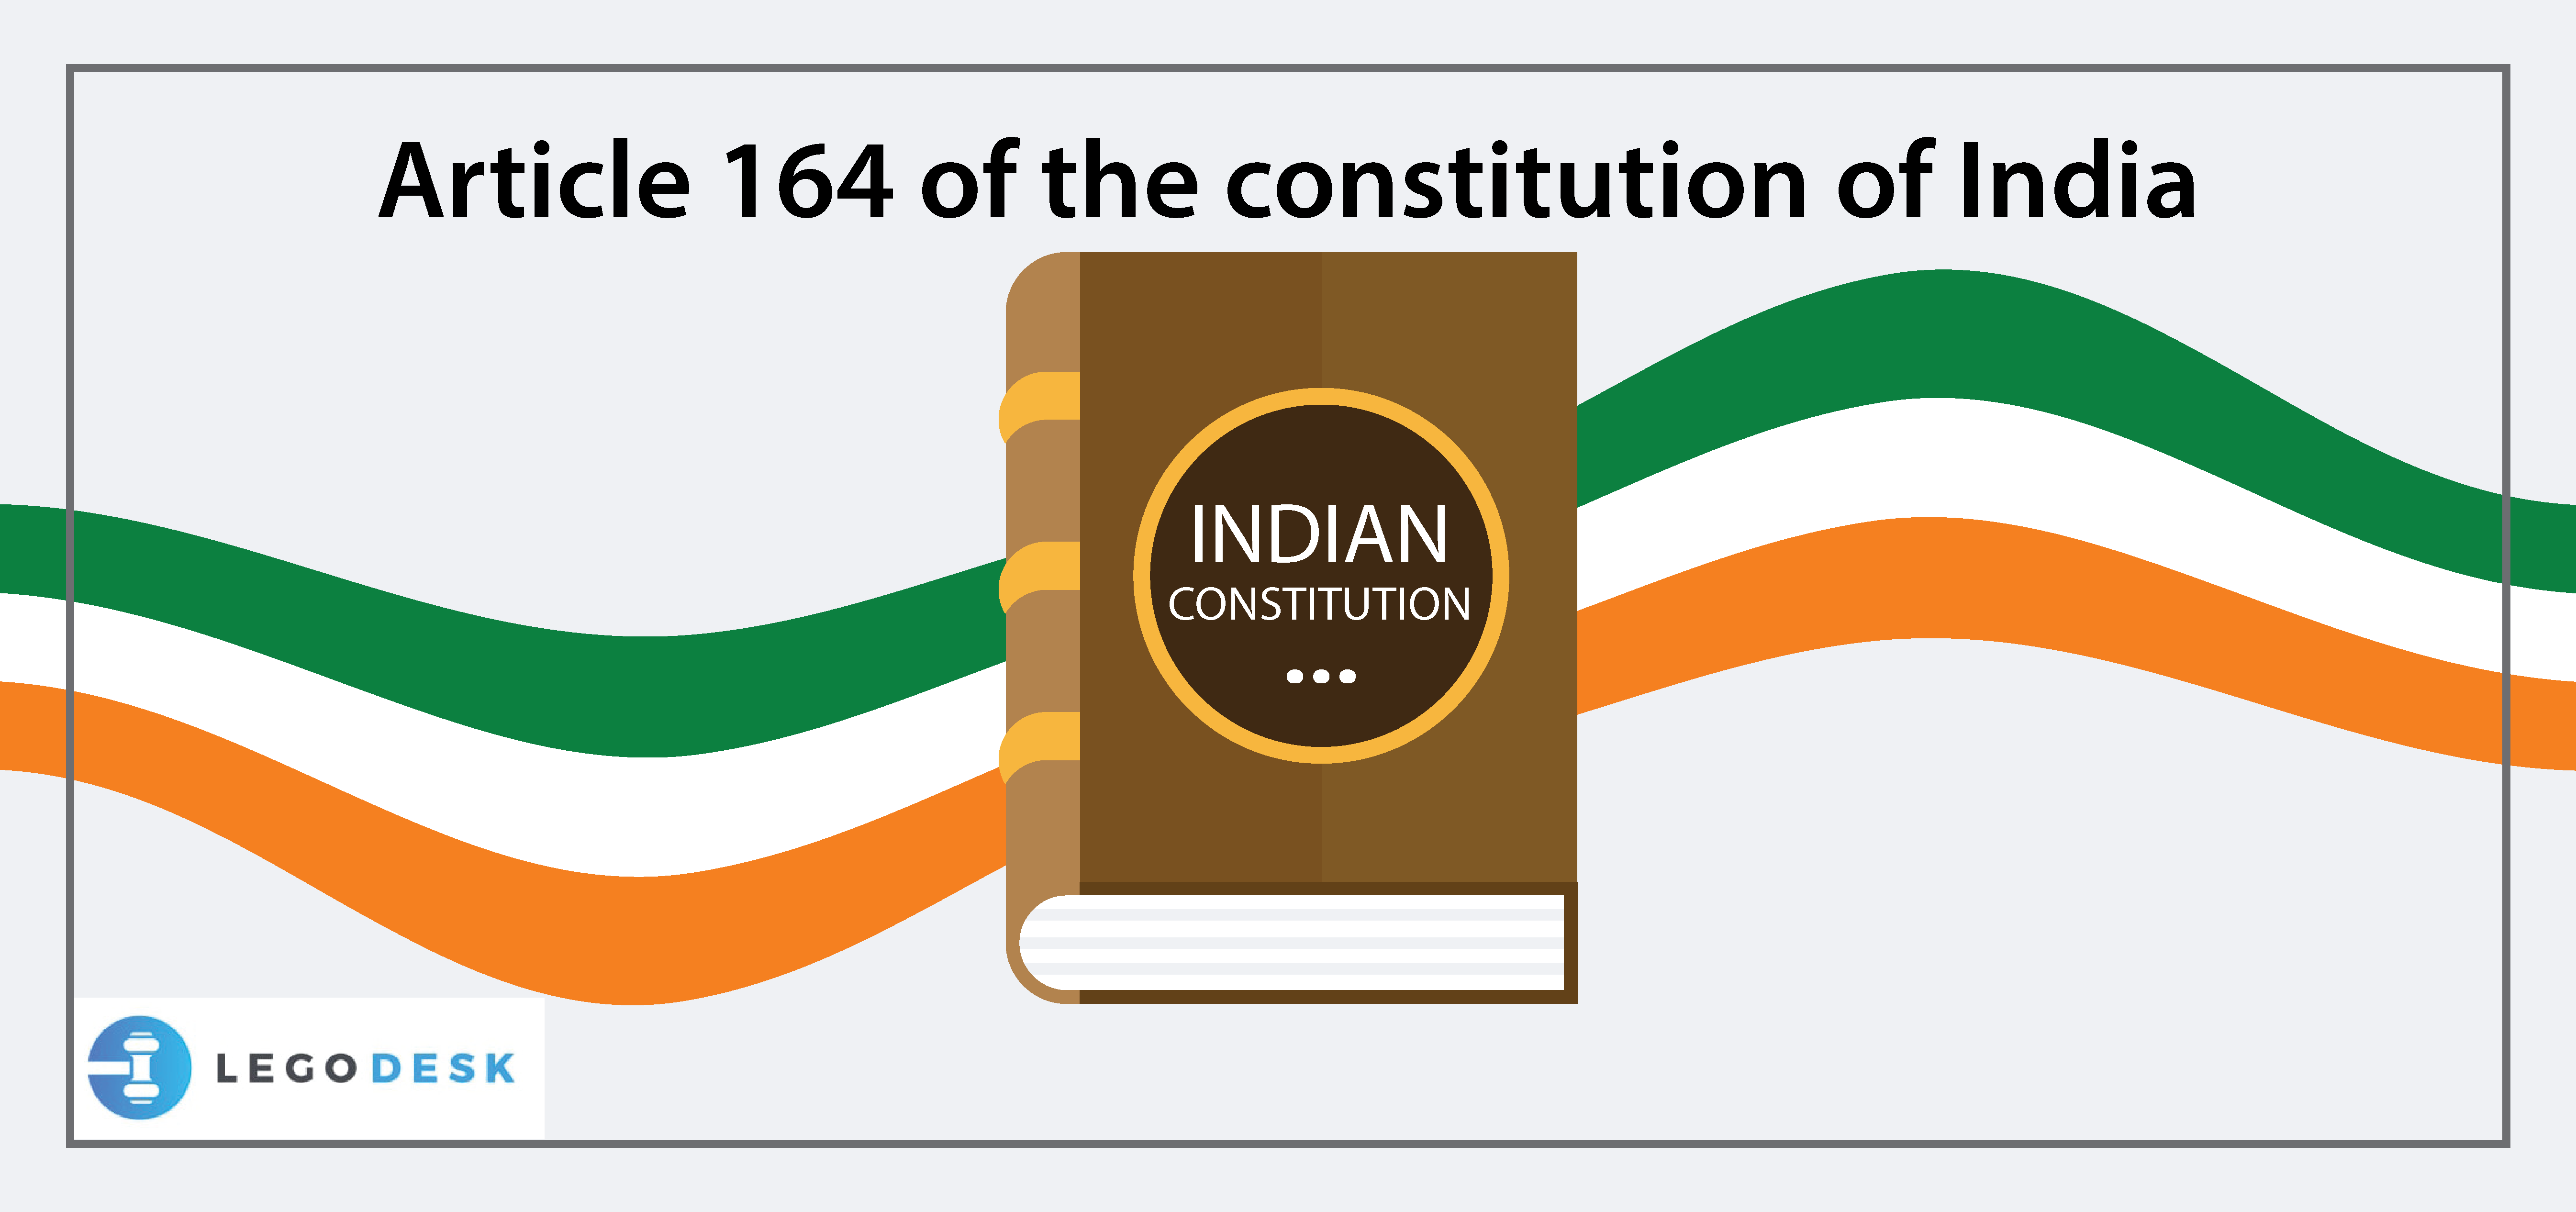 Article 164 of the Constitution of India